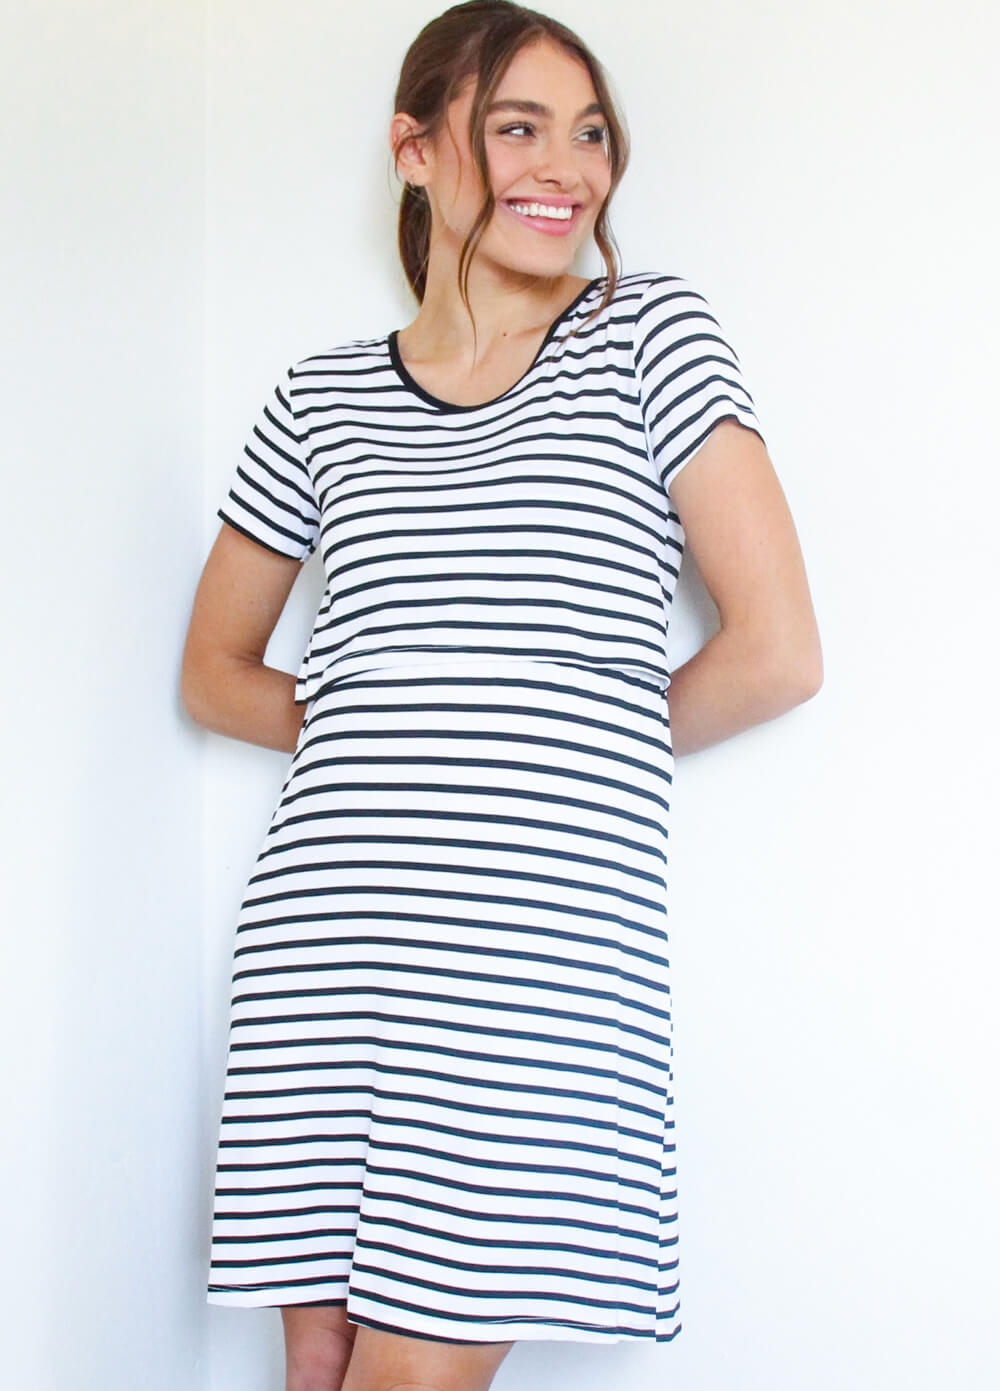 Lait & Co - Rive 'Everyday With You' Nursing Dress in Black Stripes